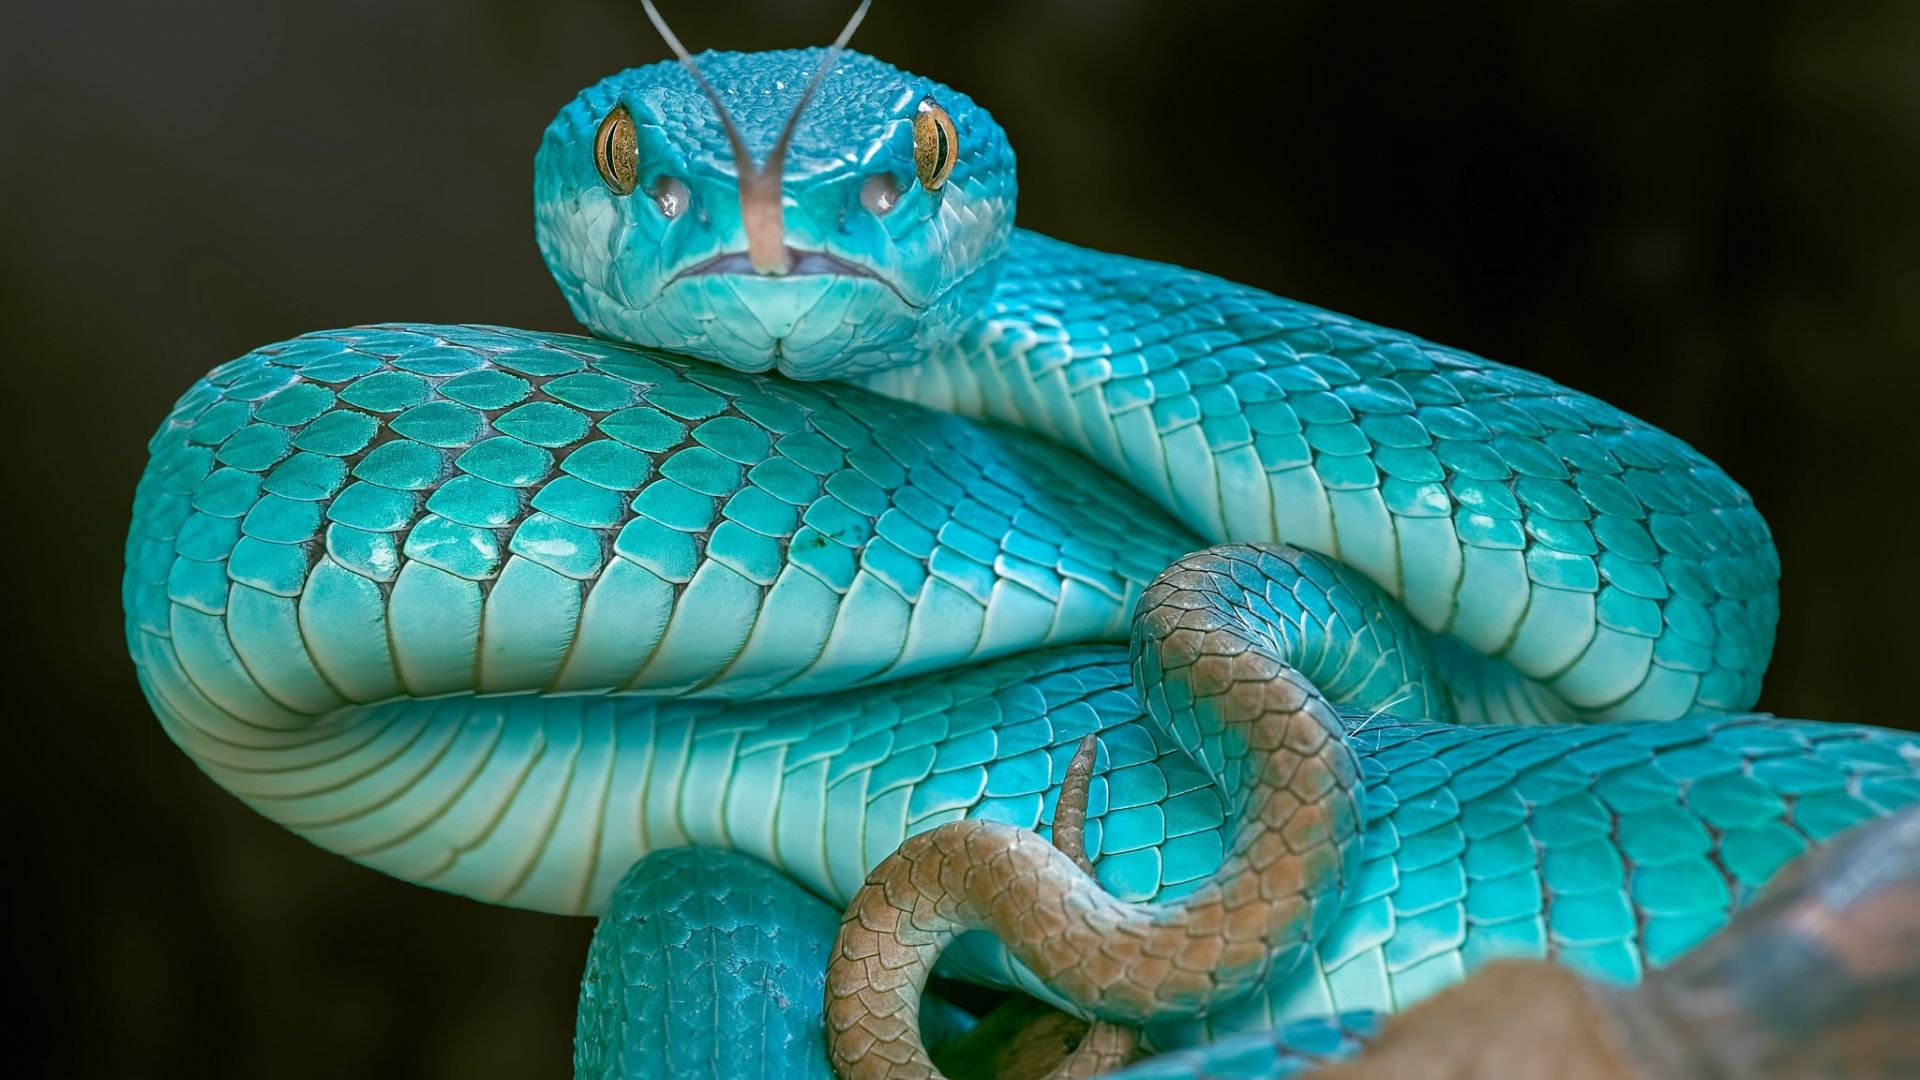 Desktop Wallpaper Blue Viper Snake, Reptile, Hd Image, Picture, Background,  Ryccmb